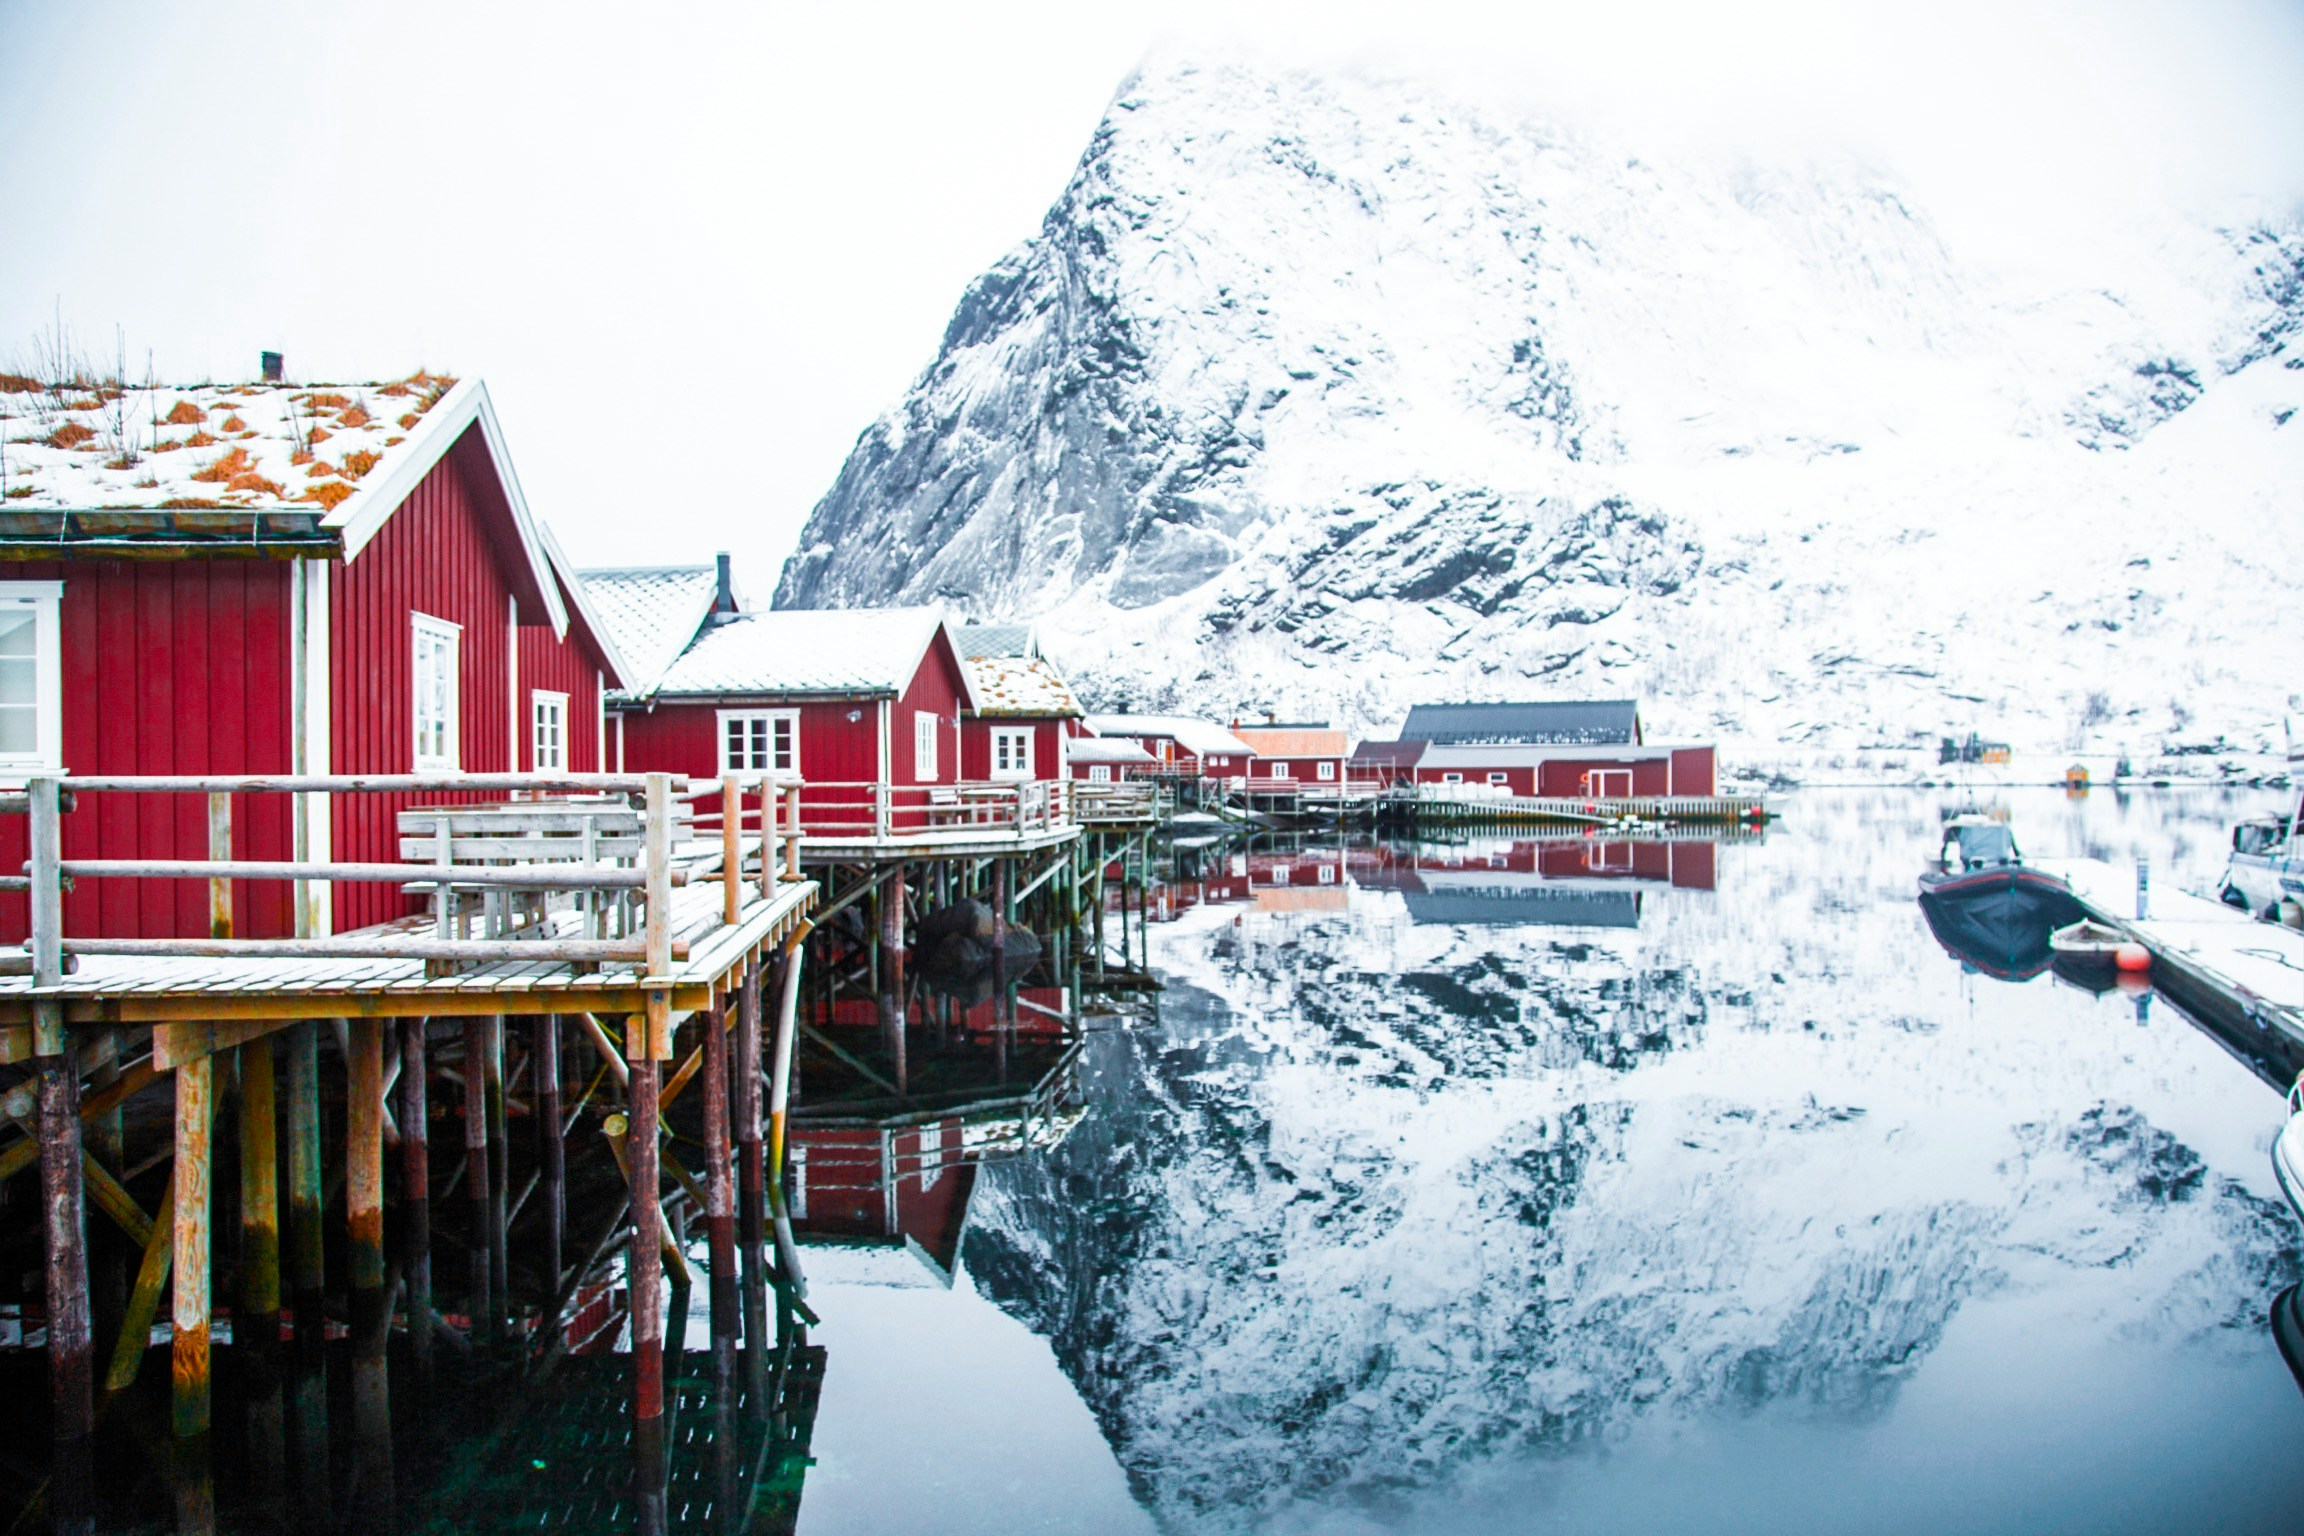 discover the breathtaking beauty of fjords with our immersive travel experience. explore stunning landscapes and pristine natural wonders as you journey through the fjords.